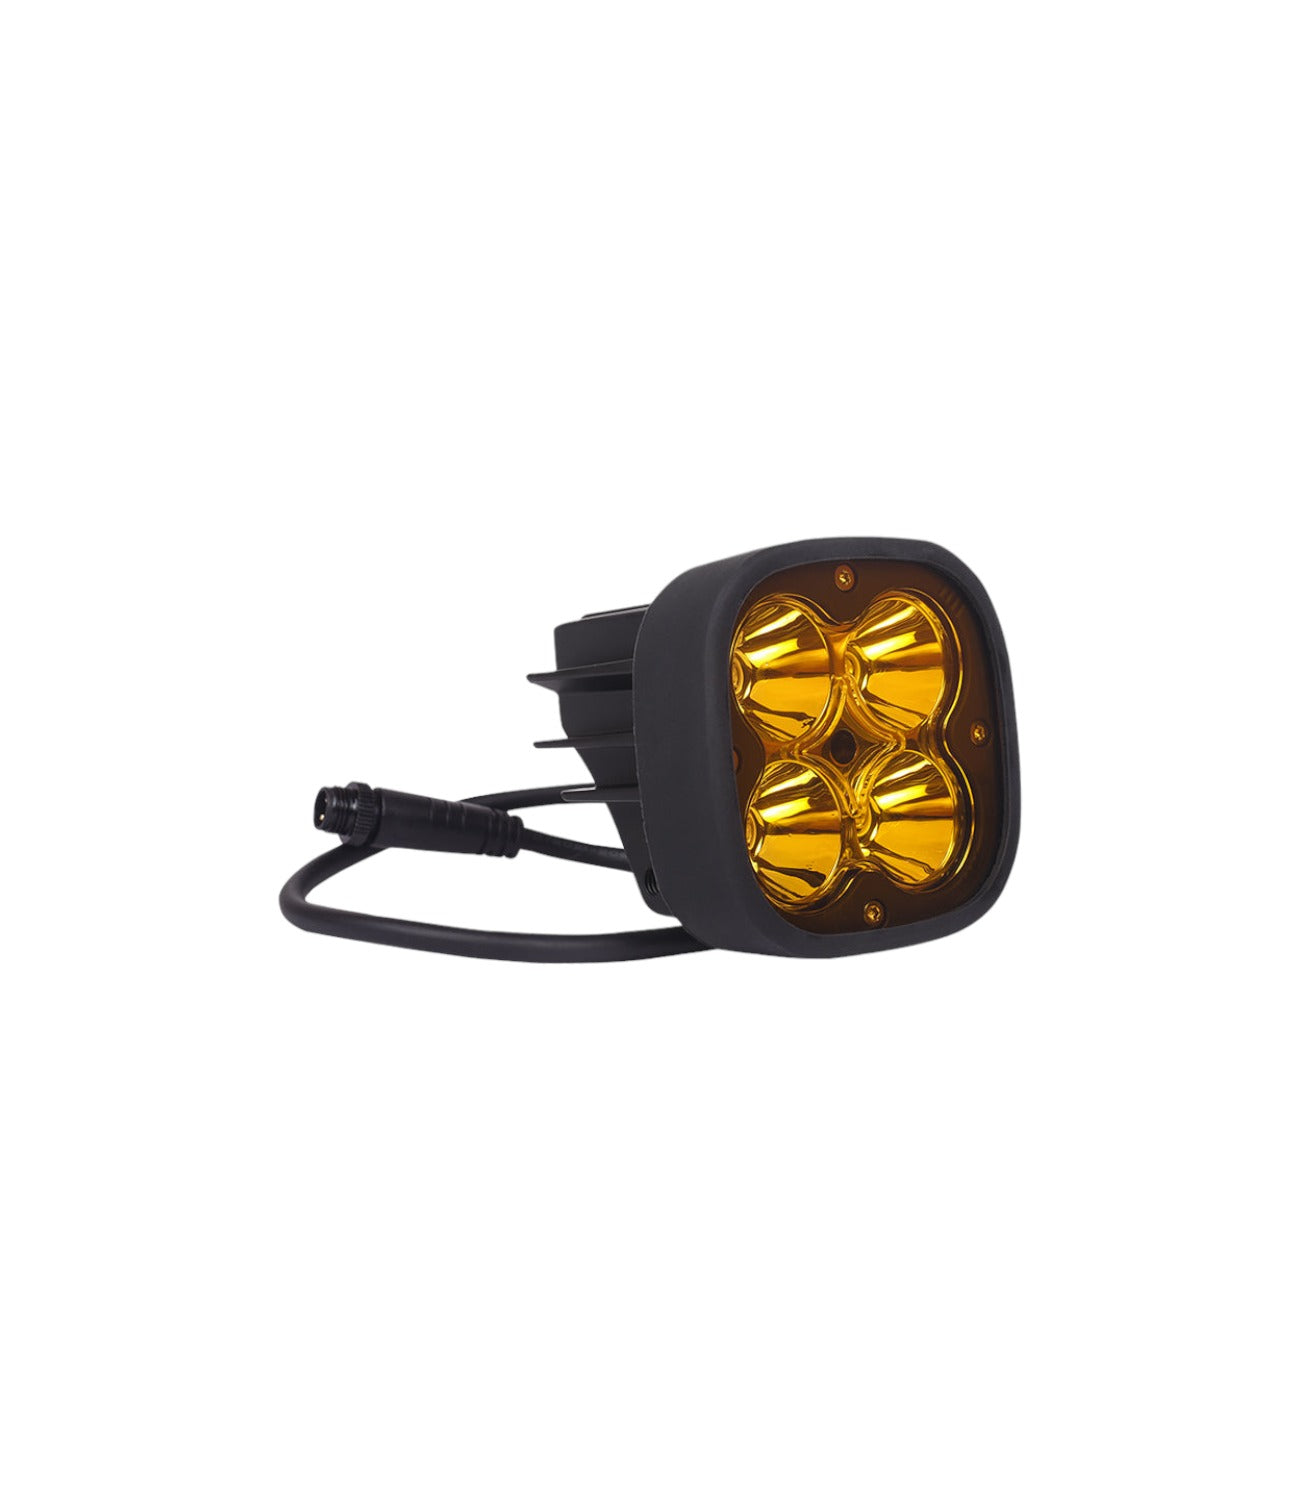 HJG 4x4 LED with Brightness Controller Switch